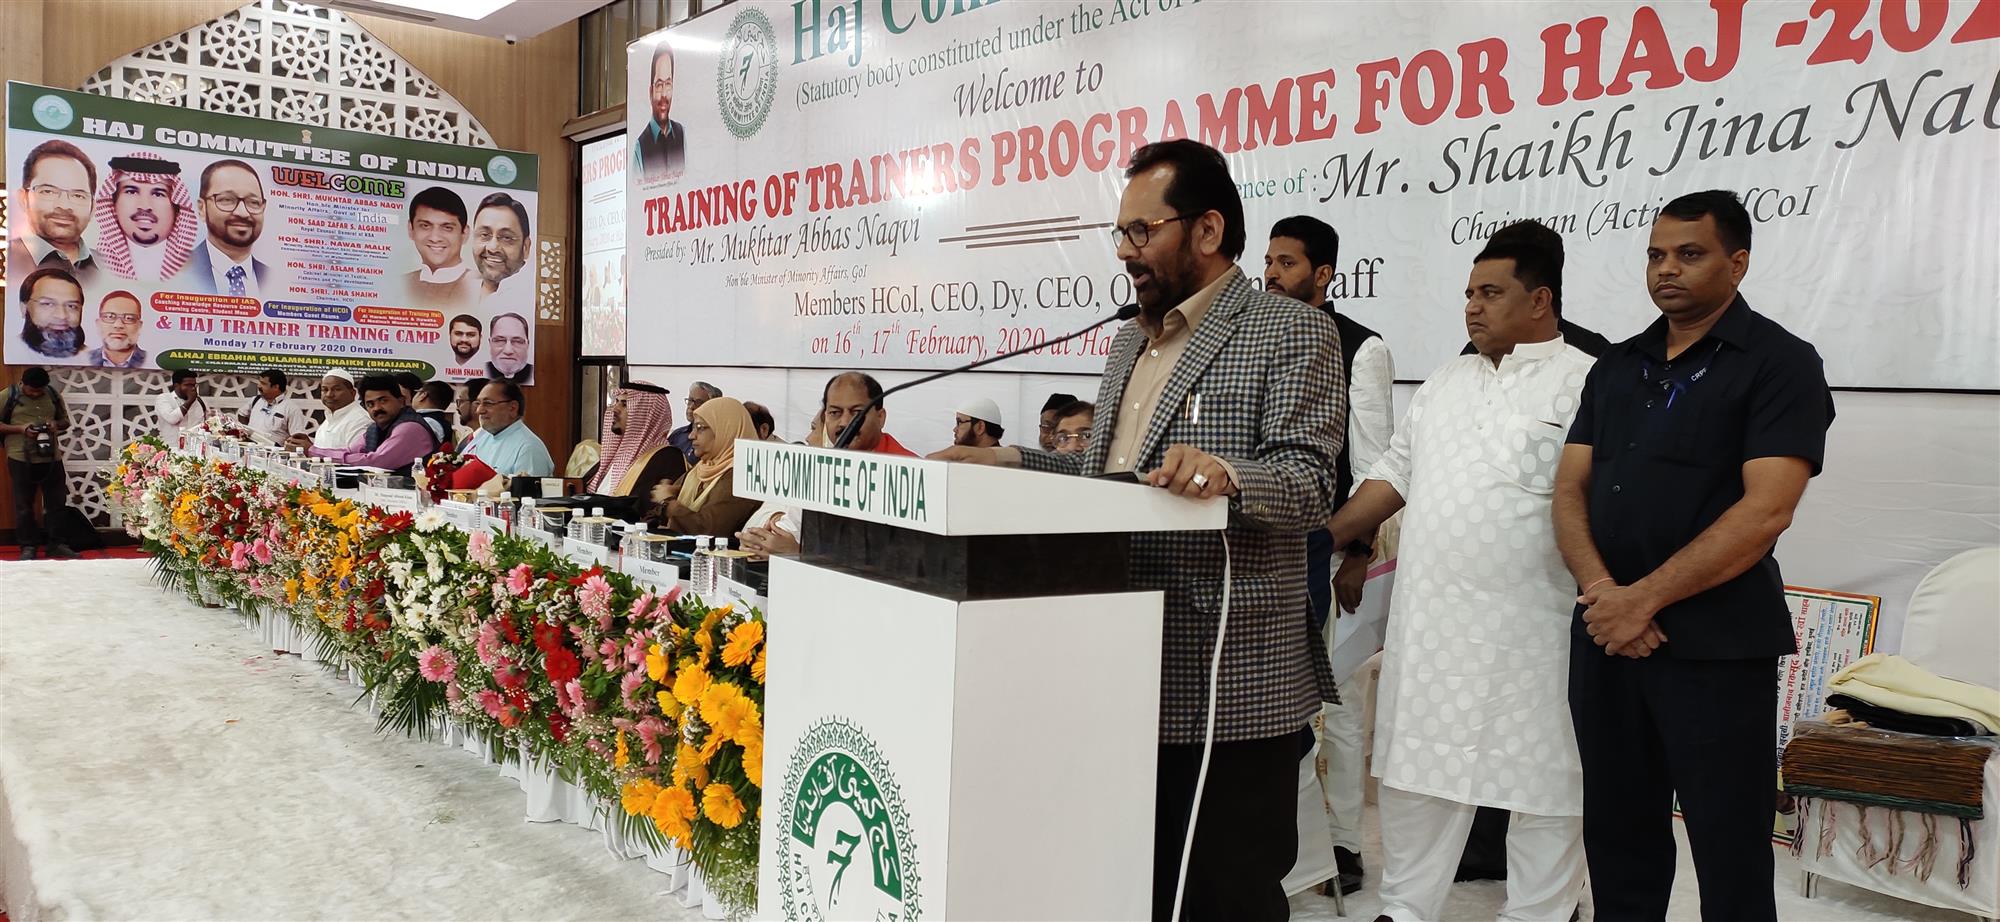 Union Minister for Minority Affairs, Shri Mukhtar Abbas Naqvi at the inaugural function of Civil Services Learning Centre, Guest Rooms, Training Hall at Haj House, in Mumbai on February 17, 2020